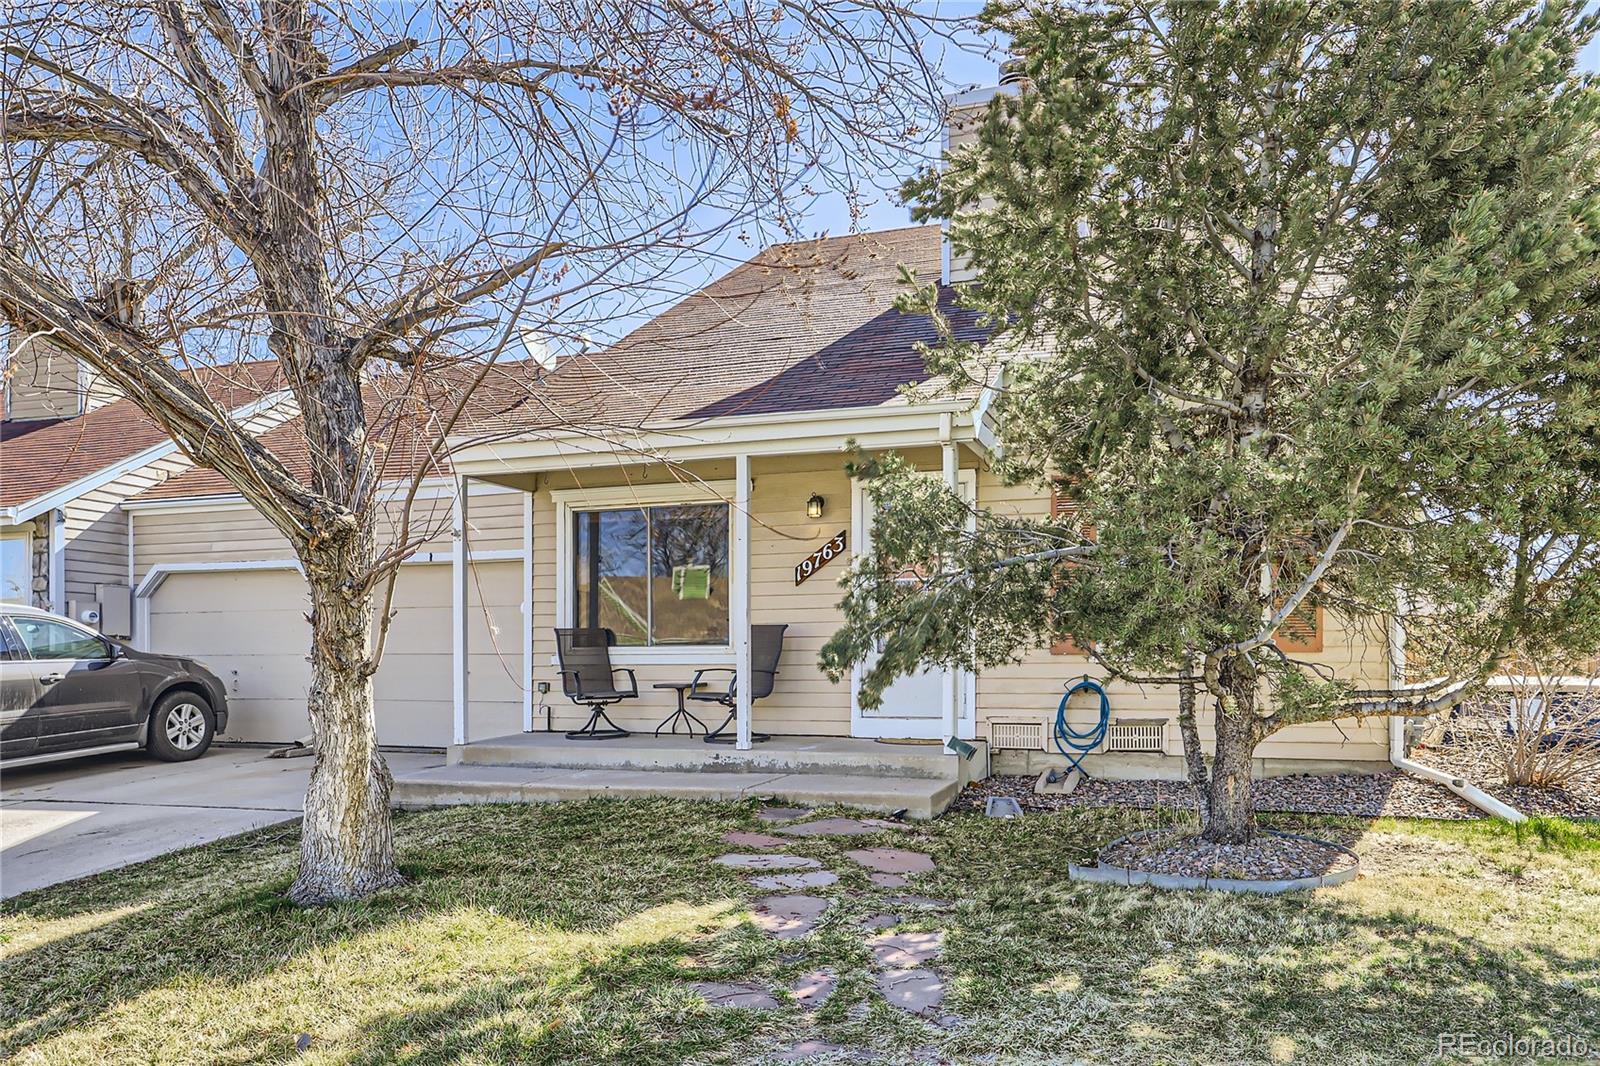 19763 e loyola circle, aurora sold home. Closed on 2024-04-25 for $424,000.